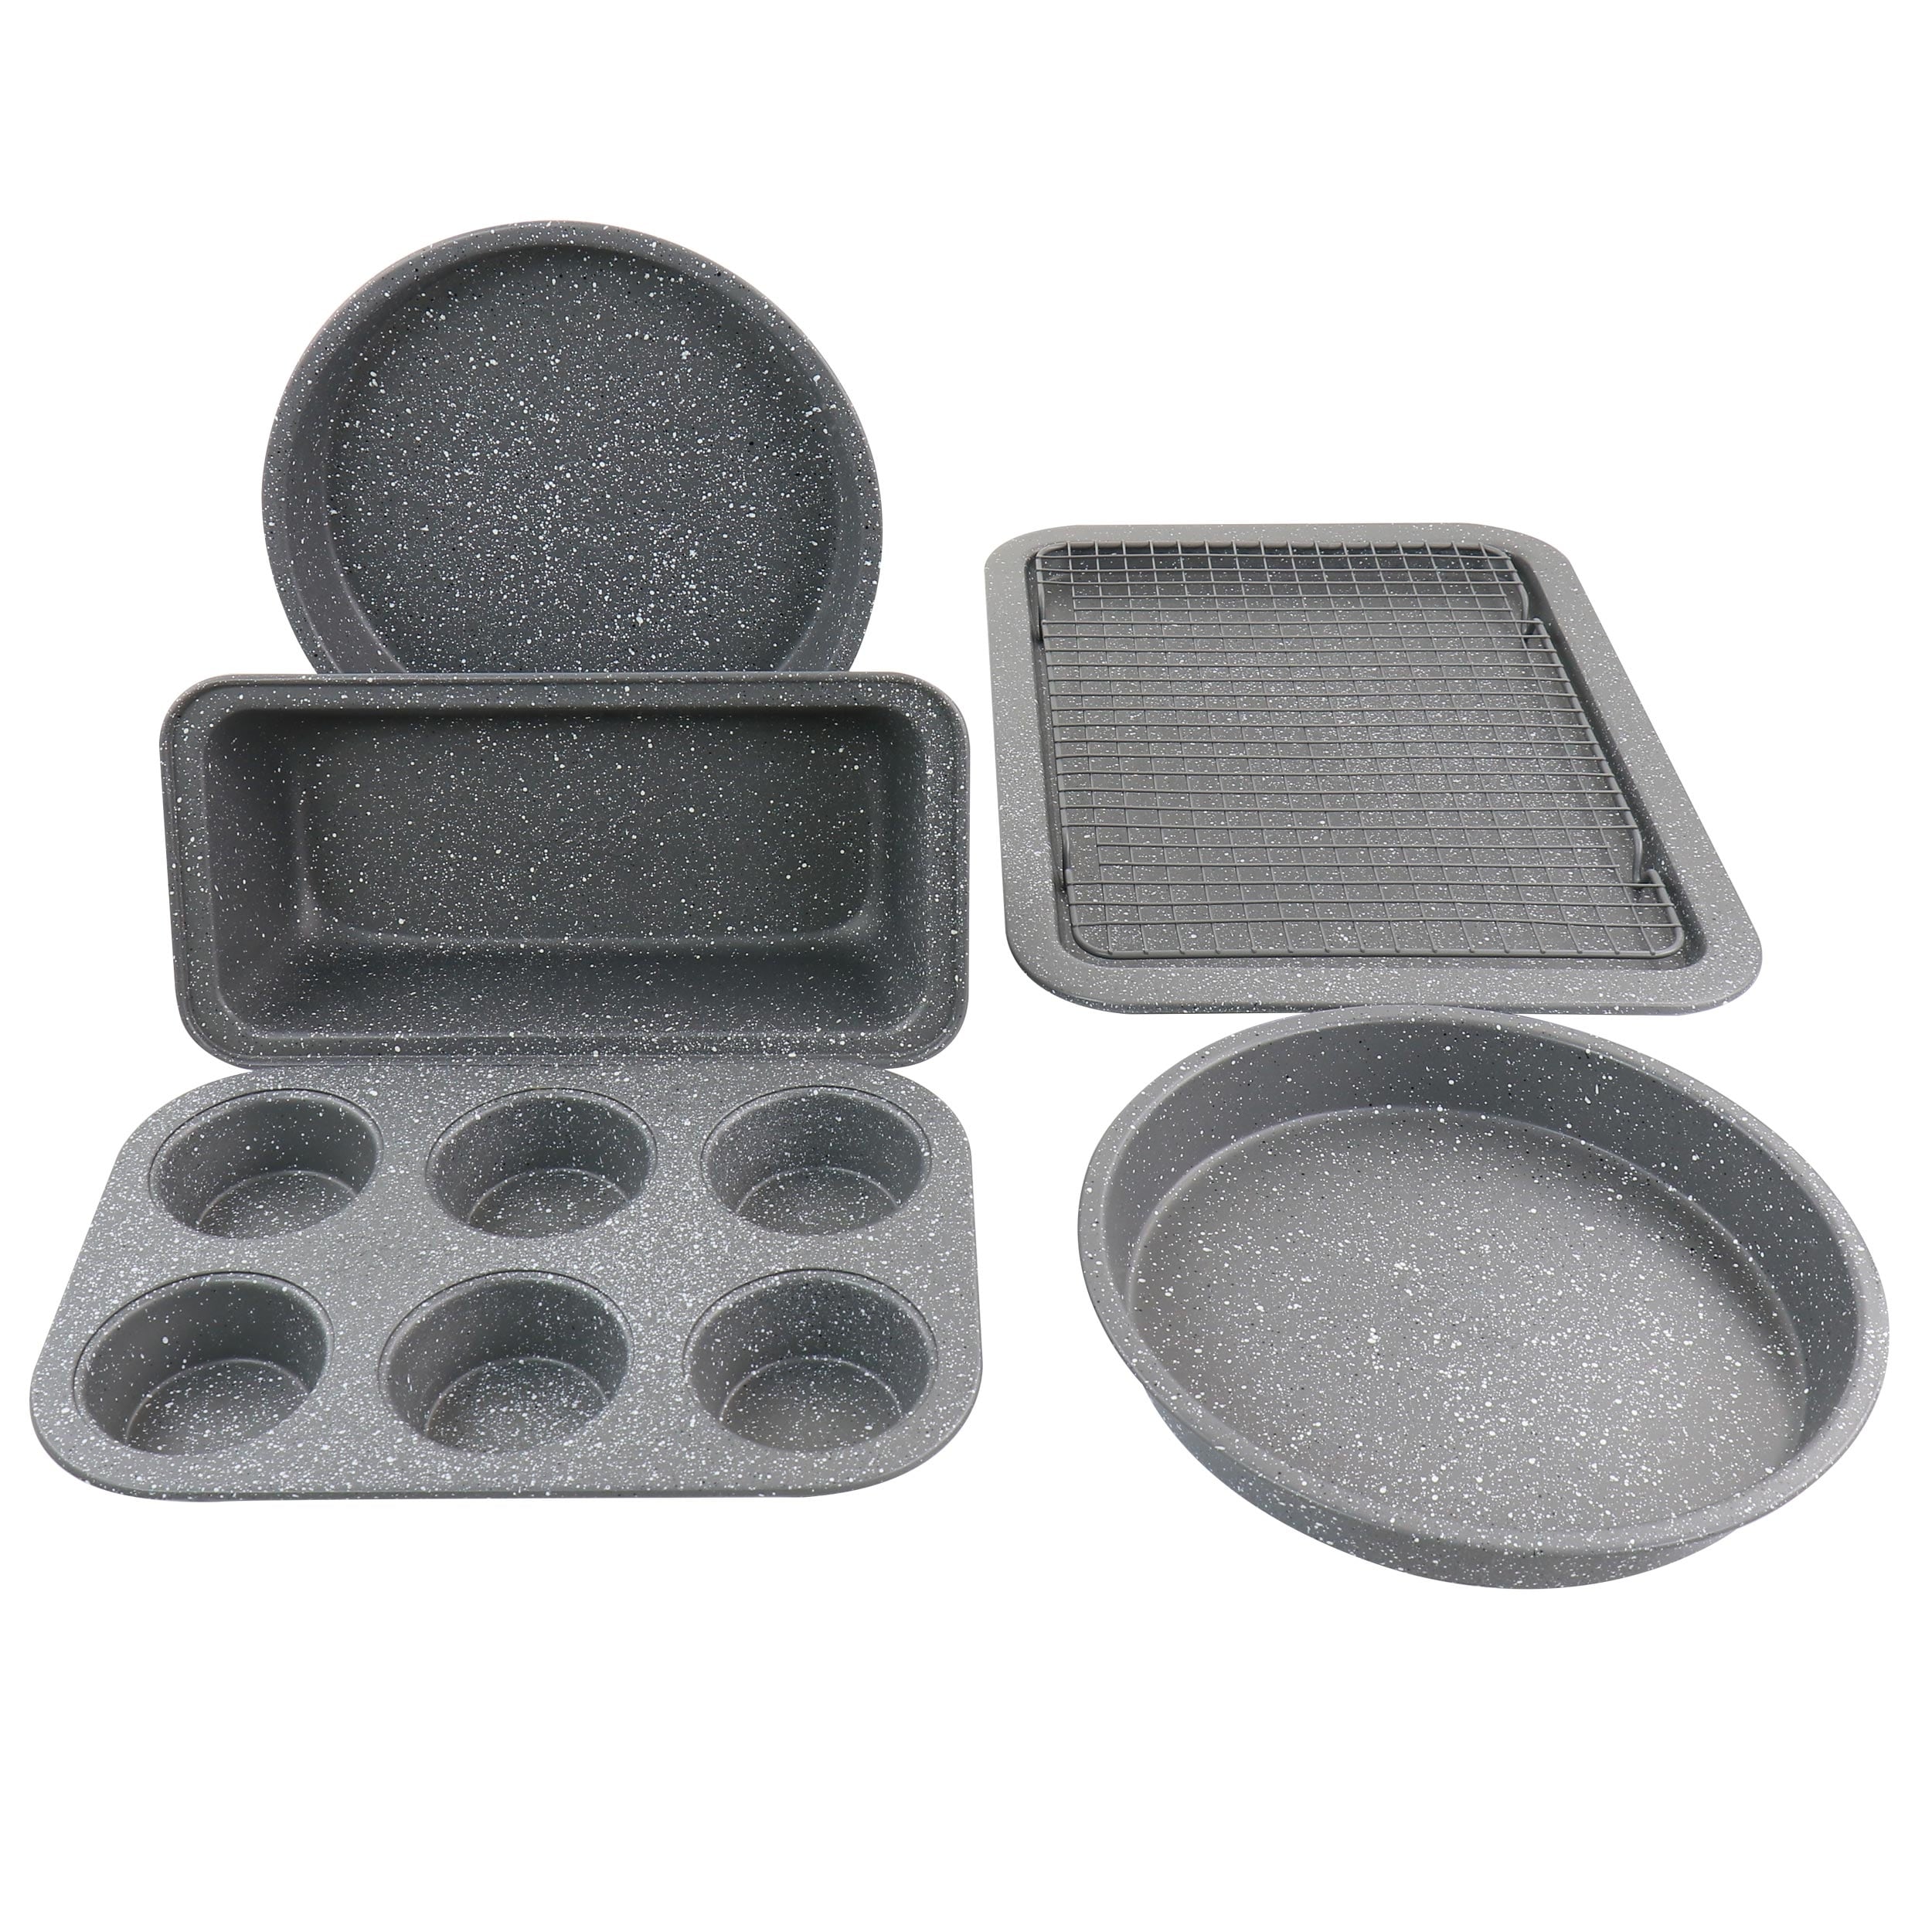 https://ak1.ostkcdn.com/images/products/is/images/direct/d80c370f050dc6c178b5fa7a4d7efc897db8165c/Oster-6-Piece-Carbon-Steel-Non-Stick-Bakeware-Set-in-Greystone.jpg